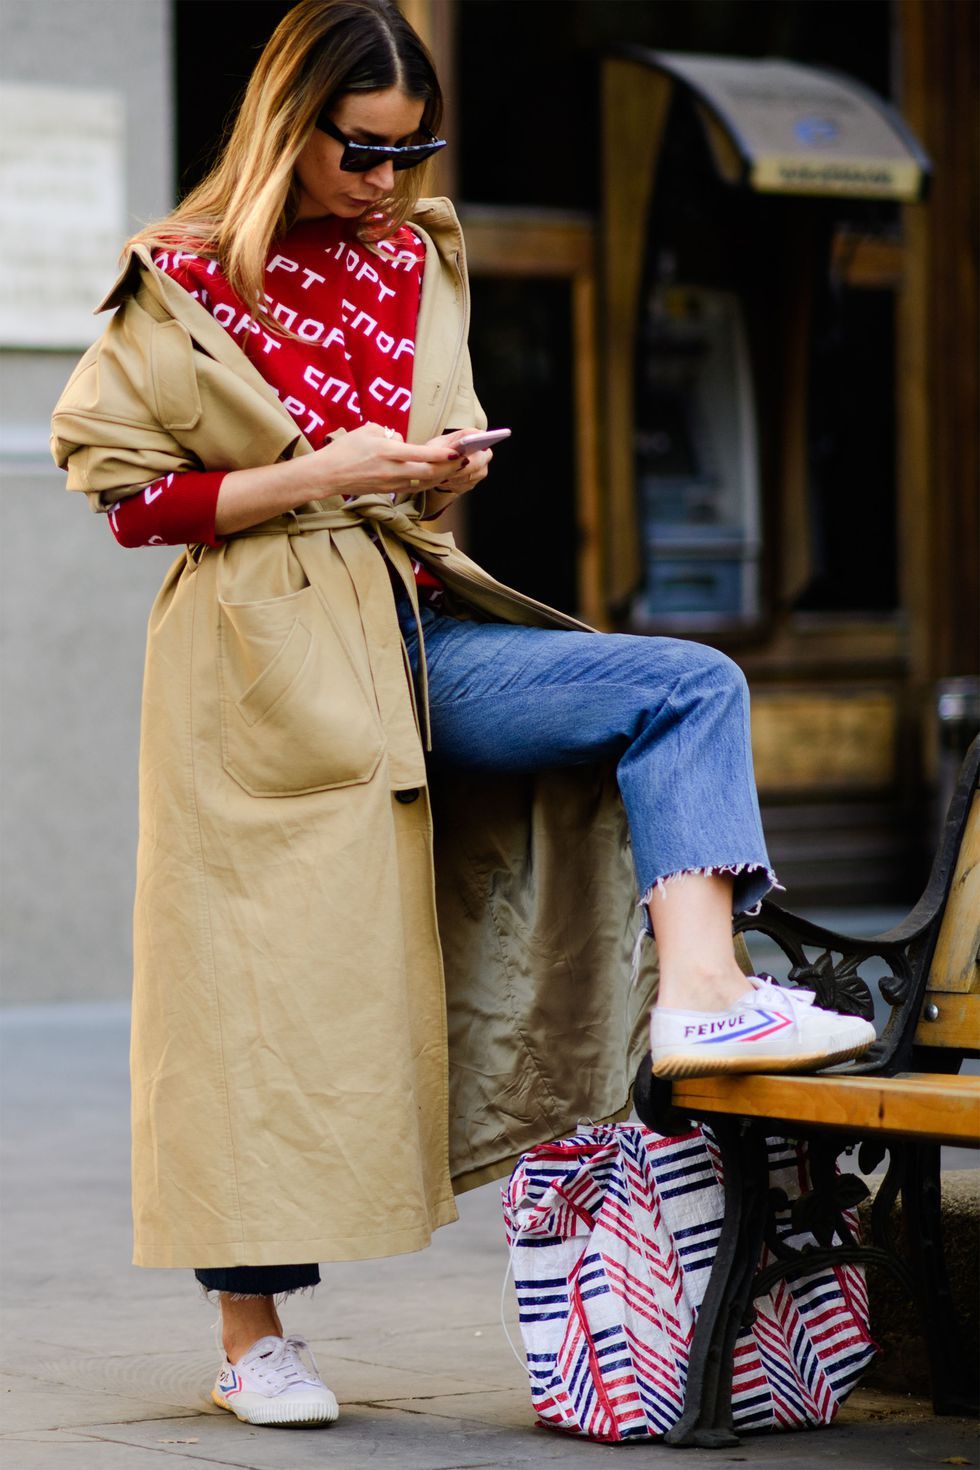 White Sneakers Are The Trending Footwear Look You Need | FASHION